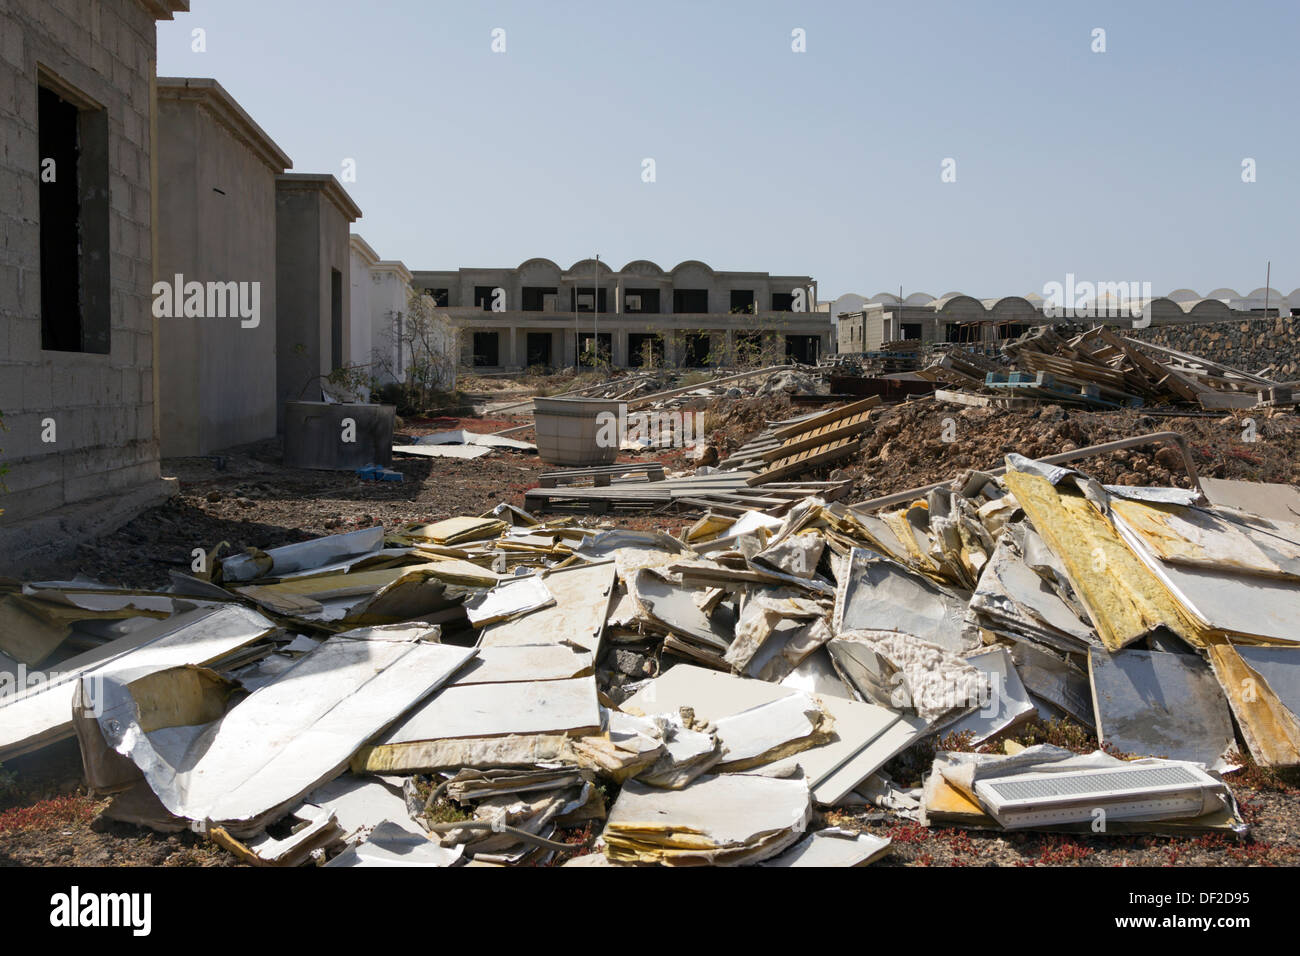 Unfinished Villas caused by Spanish Recession - Costa Teguise - Lanzarote - Canary Islands Stock Photo